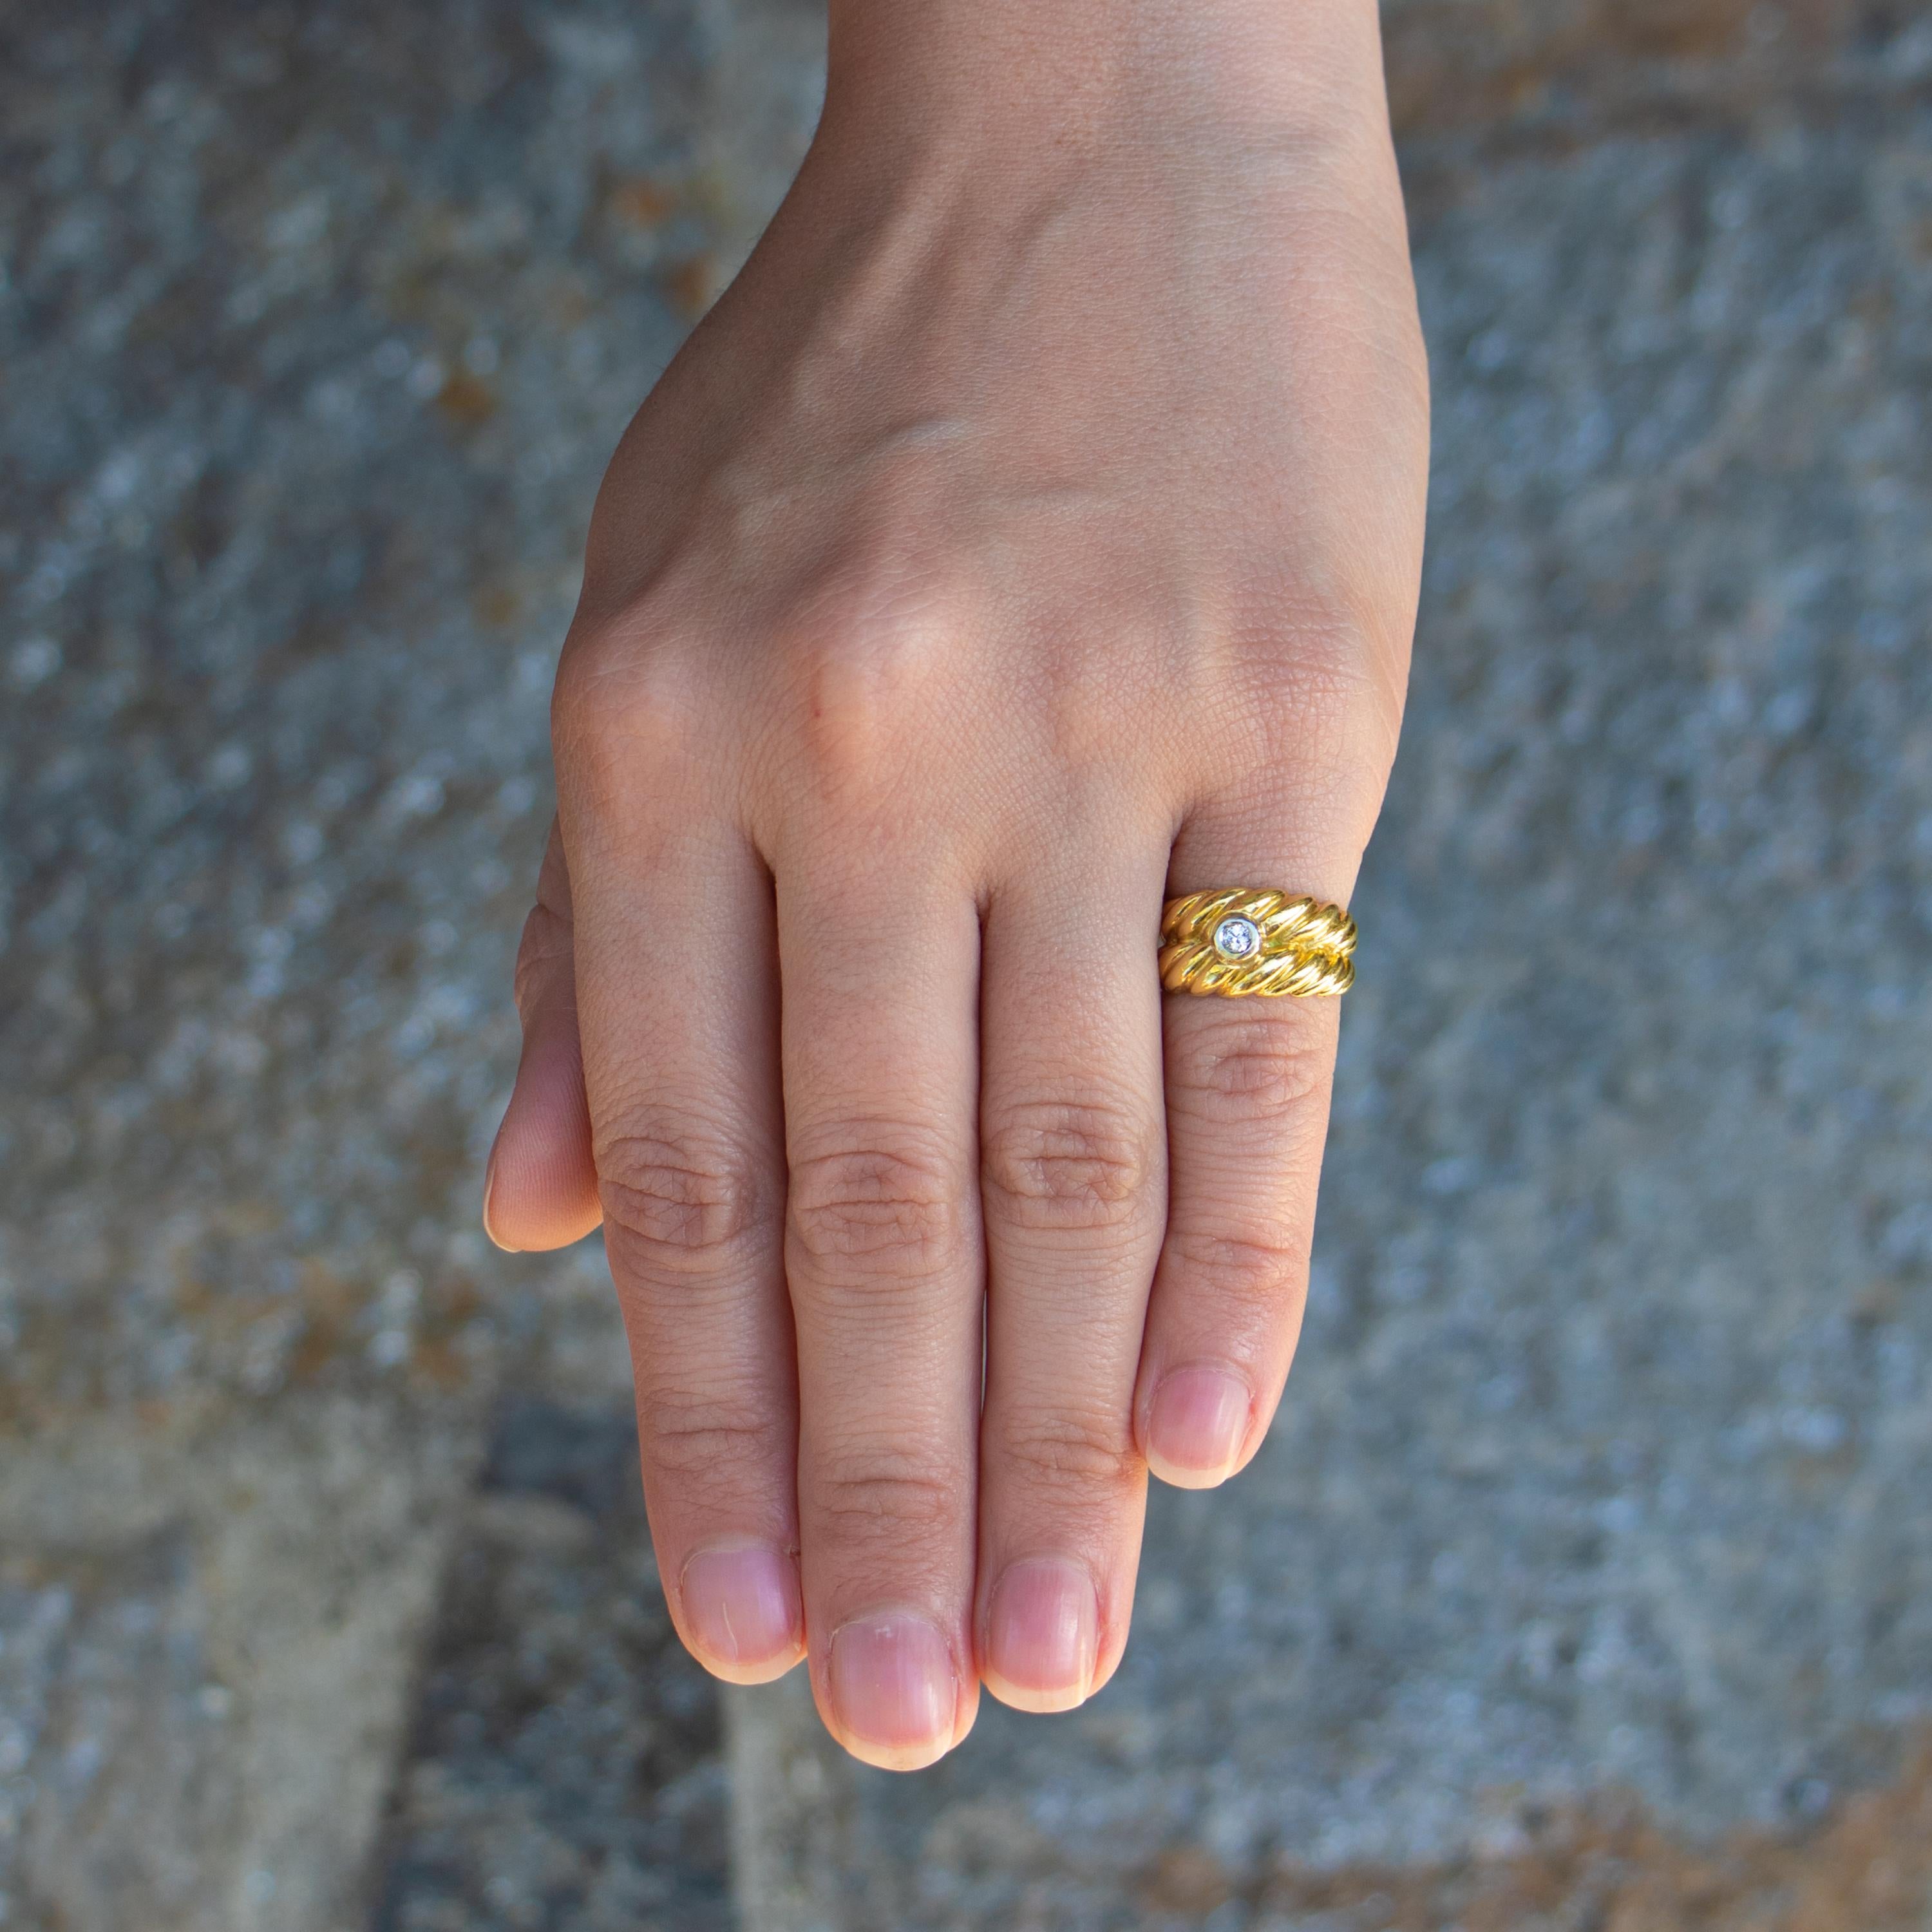 Beautiful 18K Gold ring with a small diamond on the front. Adds that subtle little bit of shine to any outfit. 
Diamond = 0.05 carats
18K Yellow Gold
Ring Size = 4
Complimentary Ring Sizing Available
7.2 Grams
Jewelry Gift Box Included